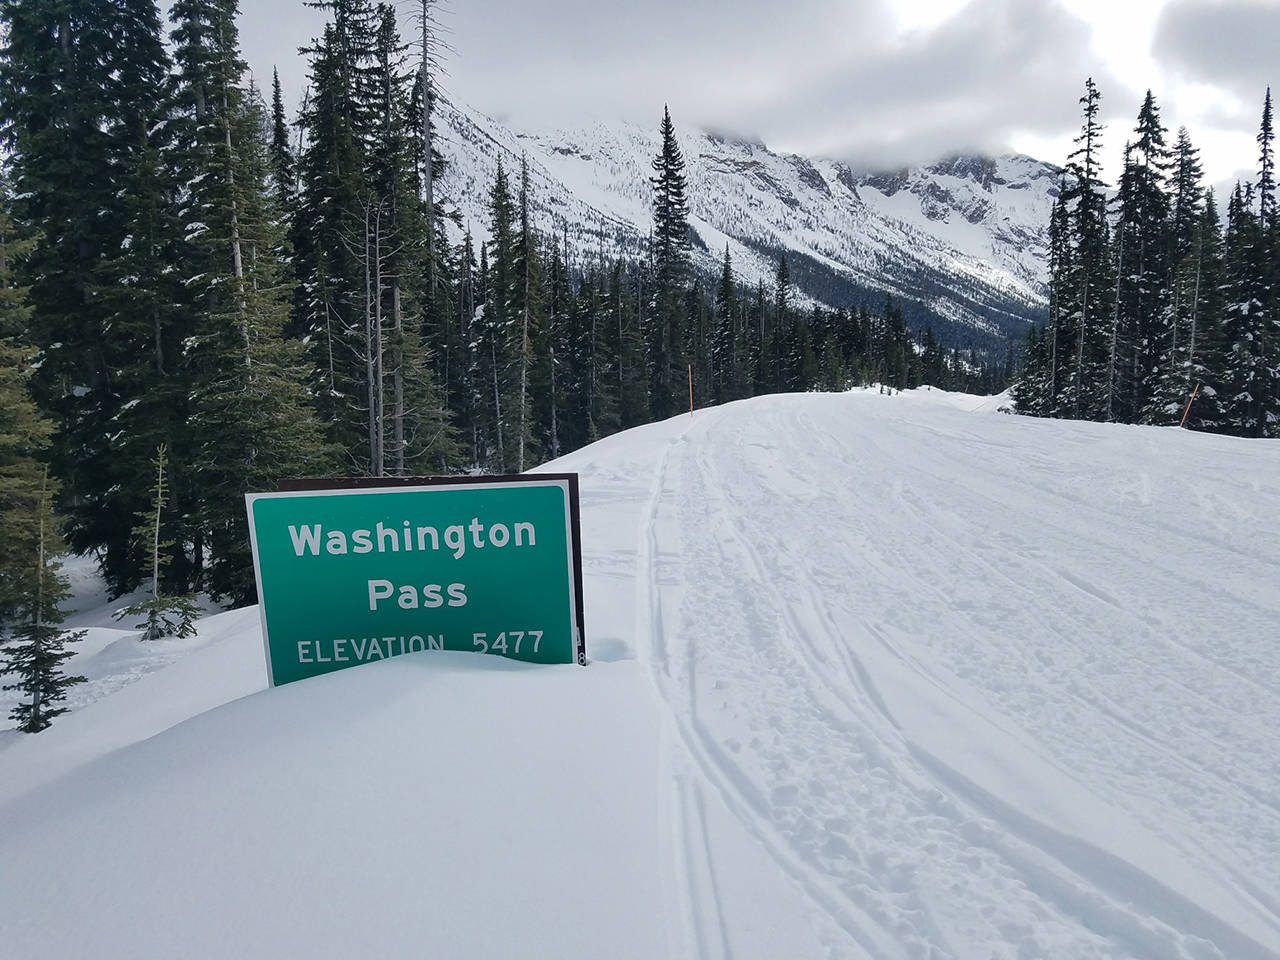 Highway 20 over North Cascades to close for winter